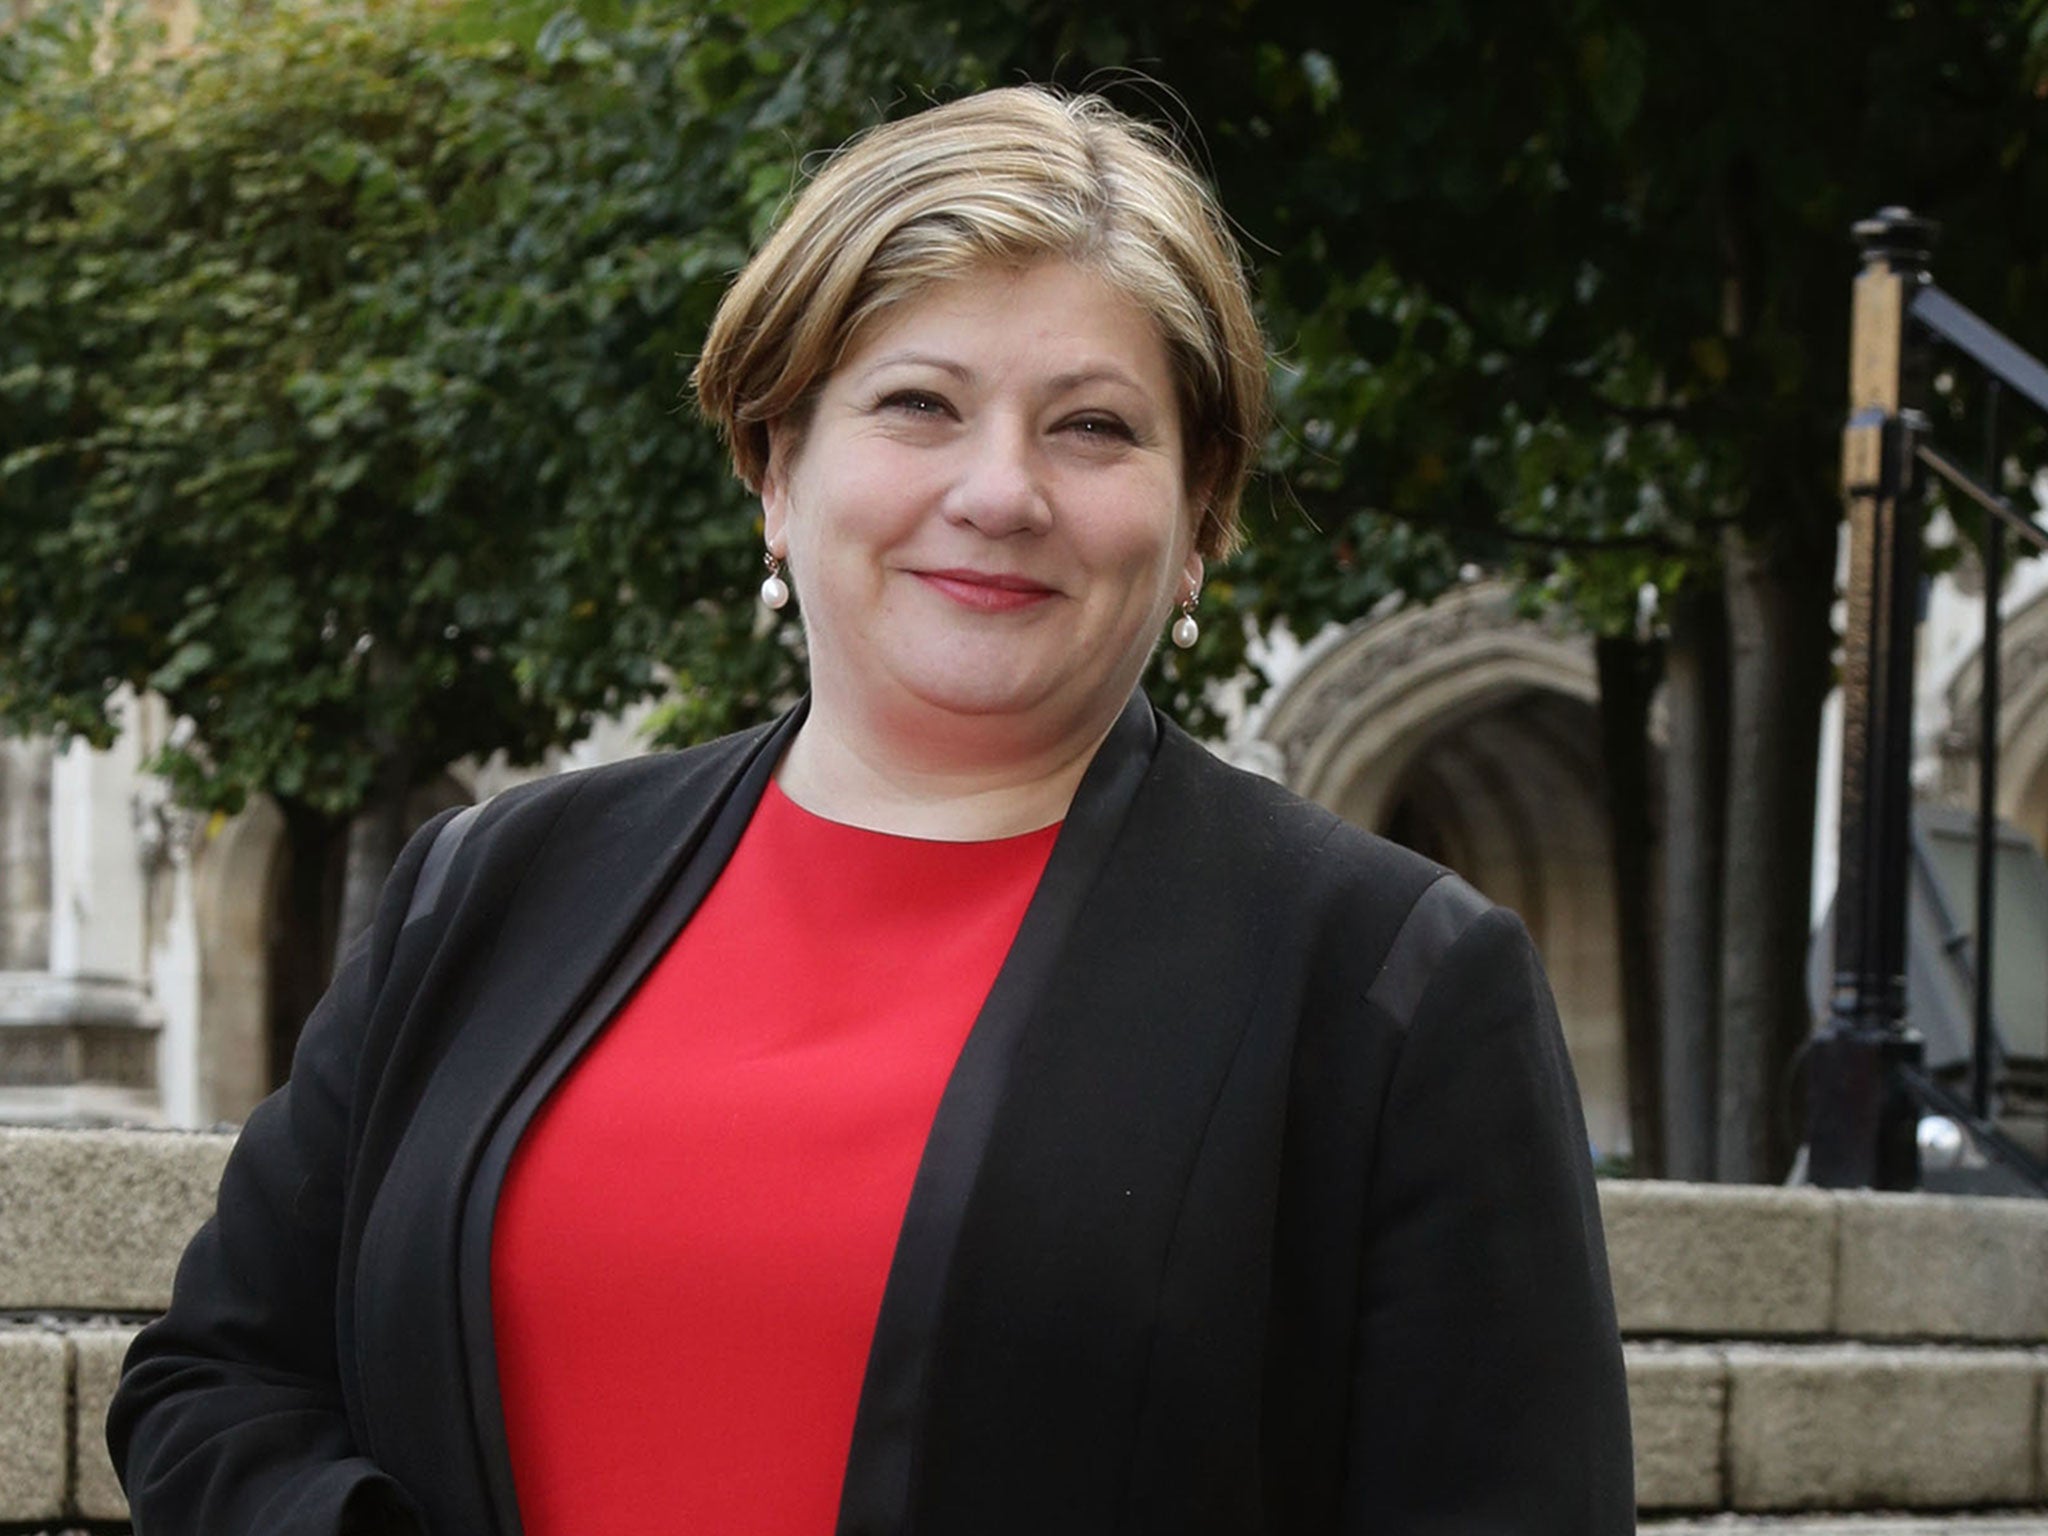 Labour's Emily Thornberry is now shadow defence secretary